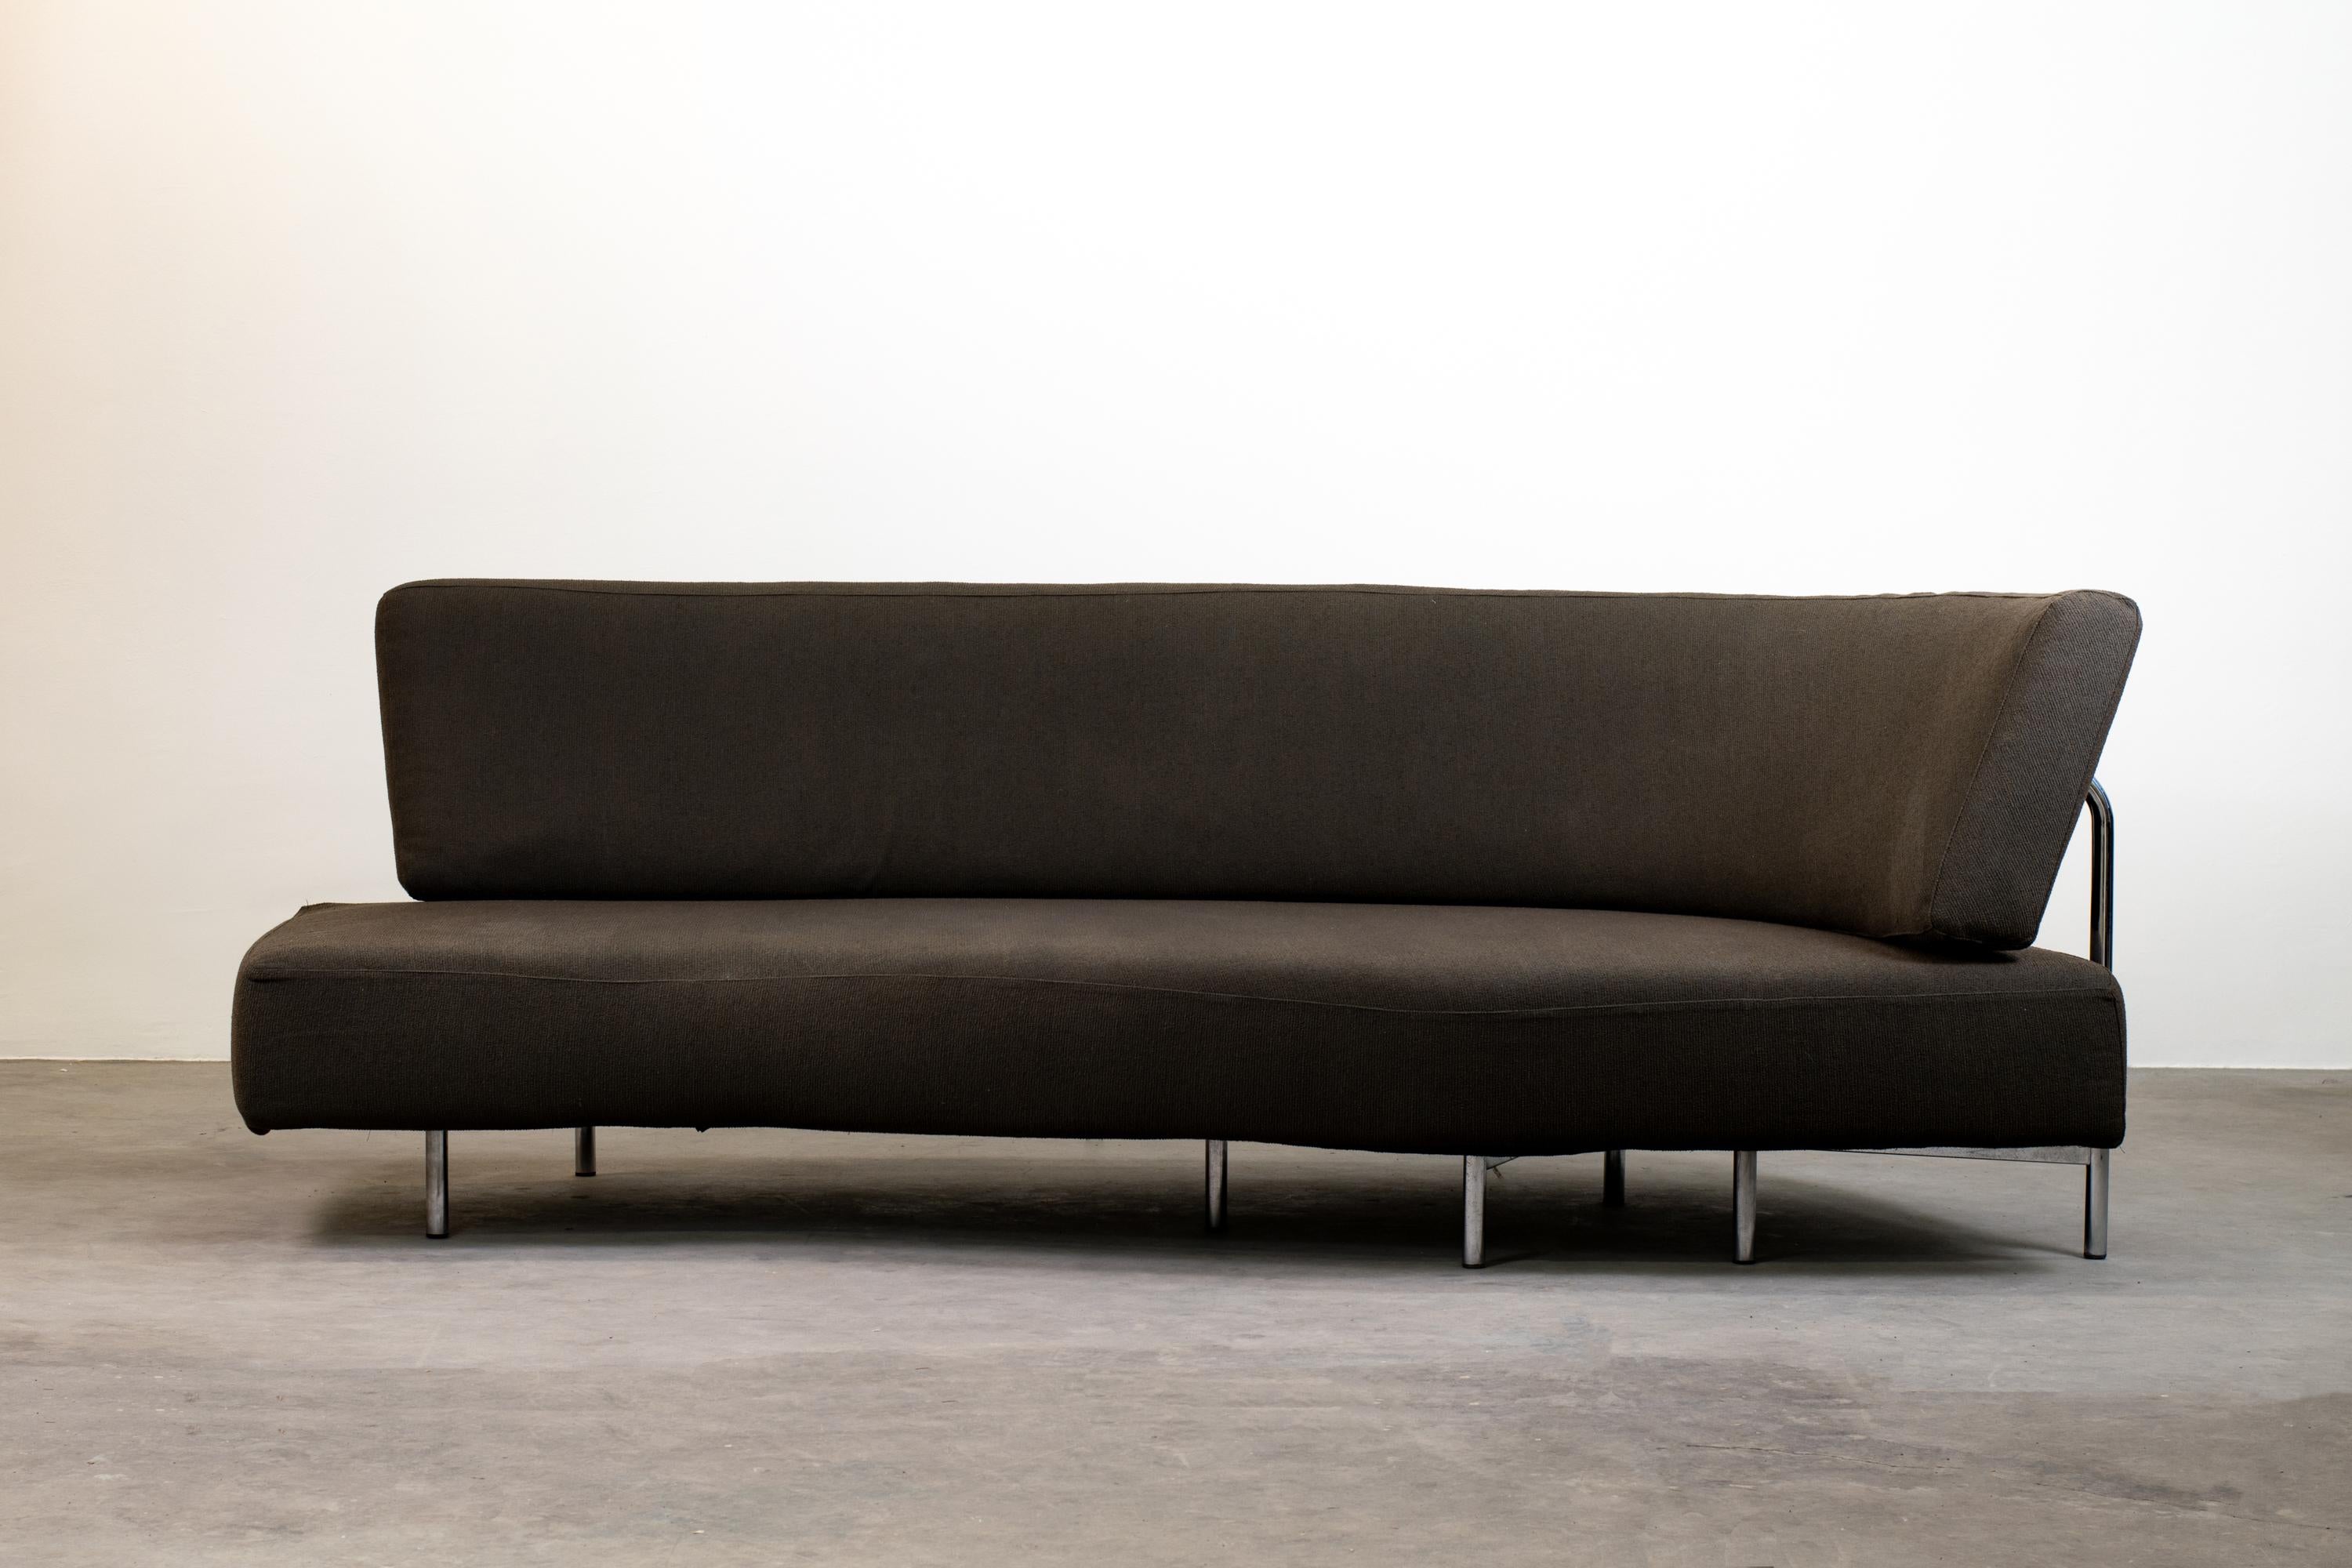 Sofa model Shark with a structure in chromed metal, wood, chromed backrest, and ground support, padding in polyurethane foam covered with dark brown fabric.

Designed by Francesco Binafré and manufactured by Edra in the 2000s

Francesco Binfaré is